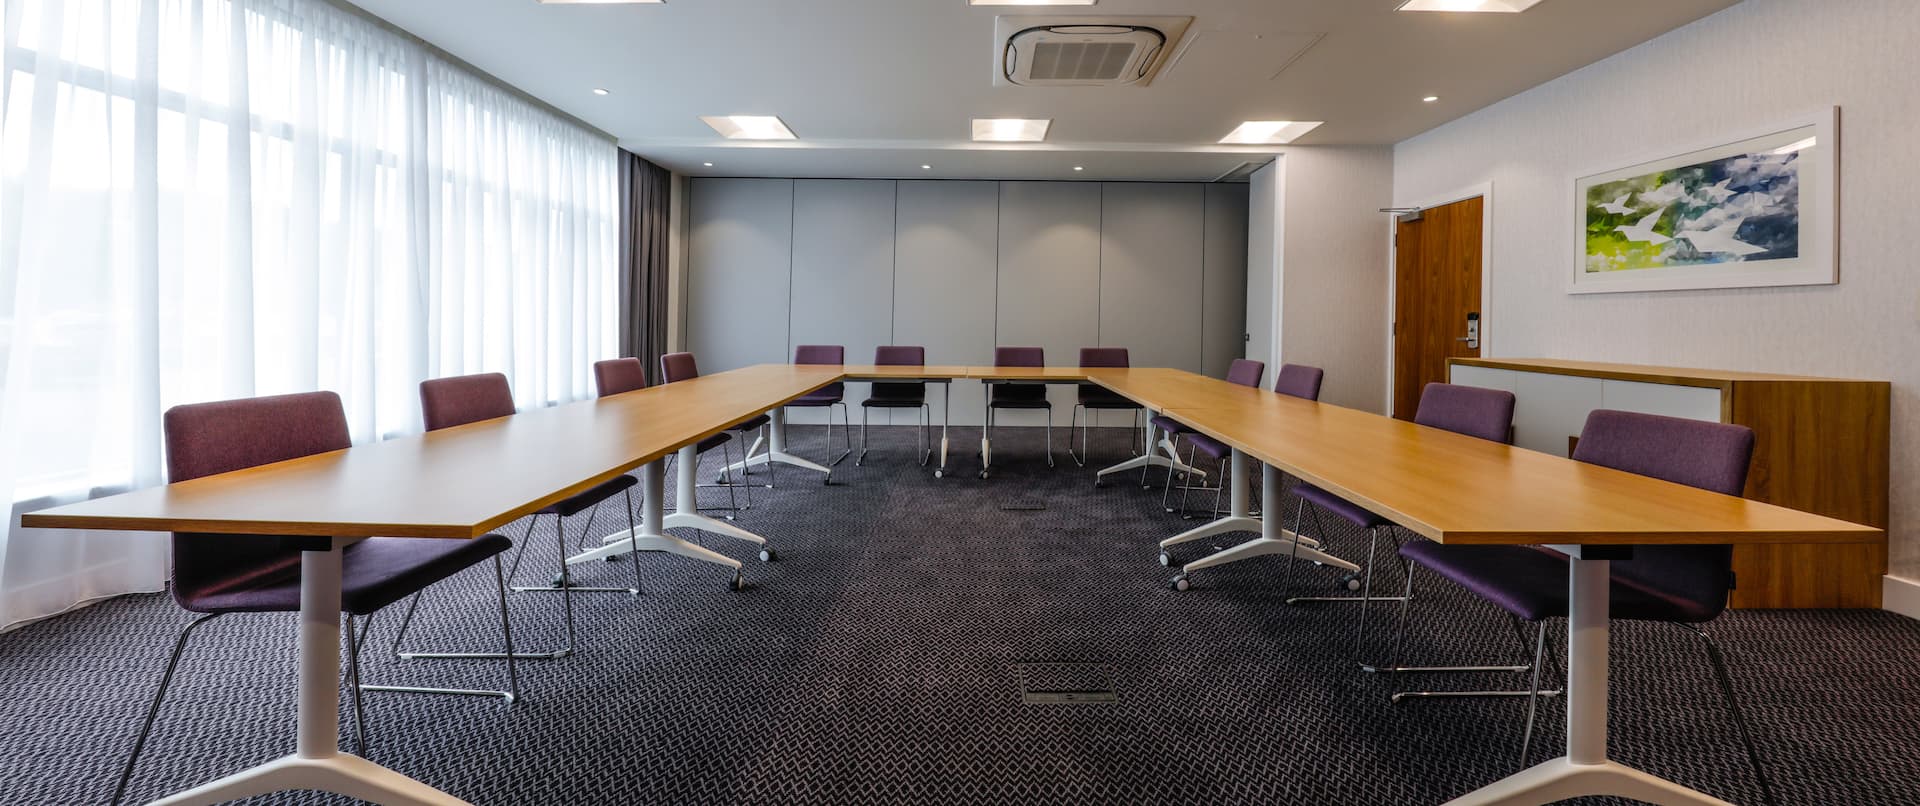 Meeting Room with U-Shaped Conference Table